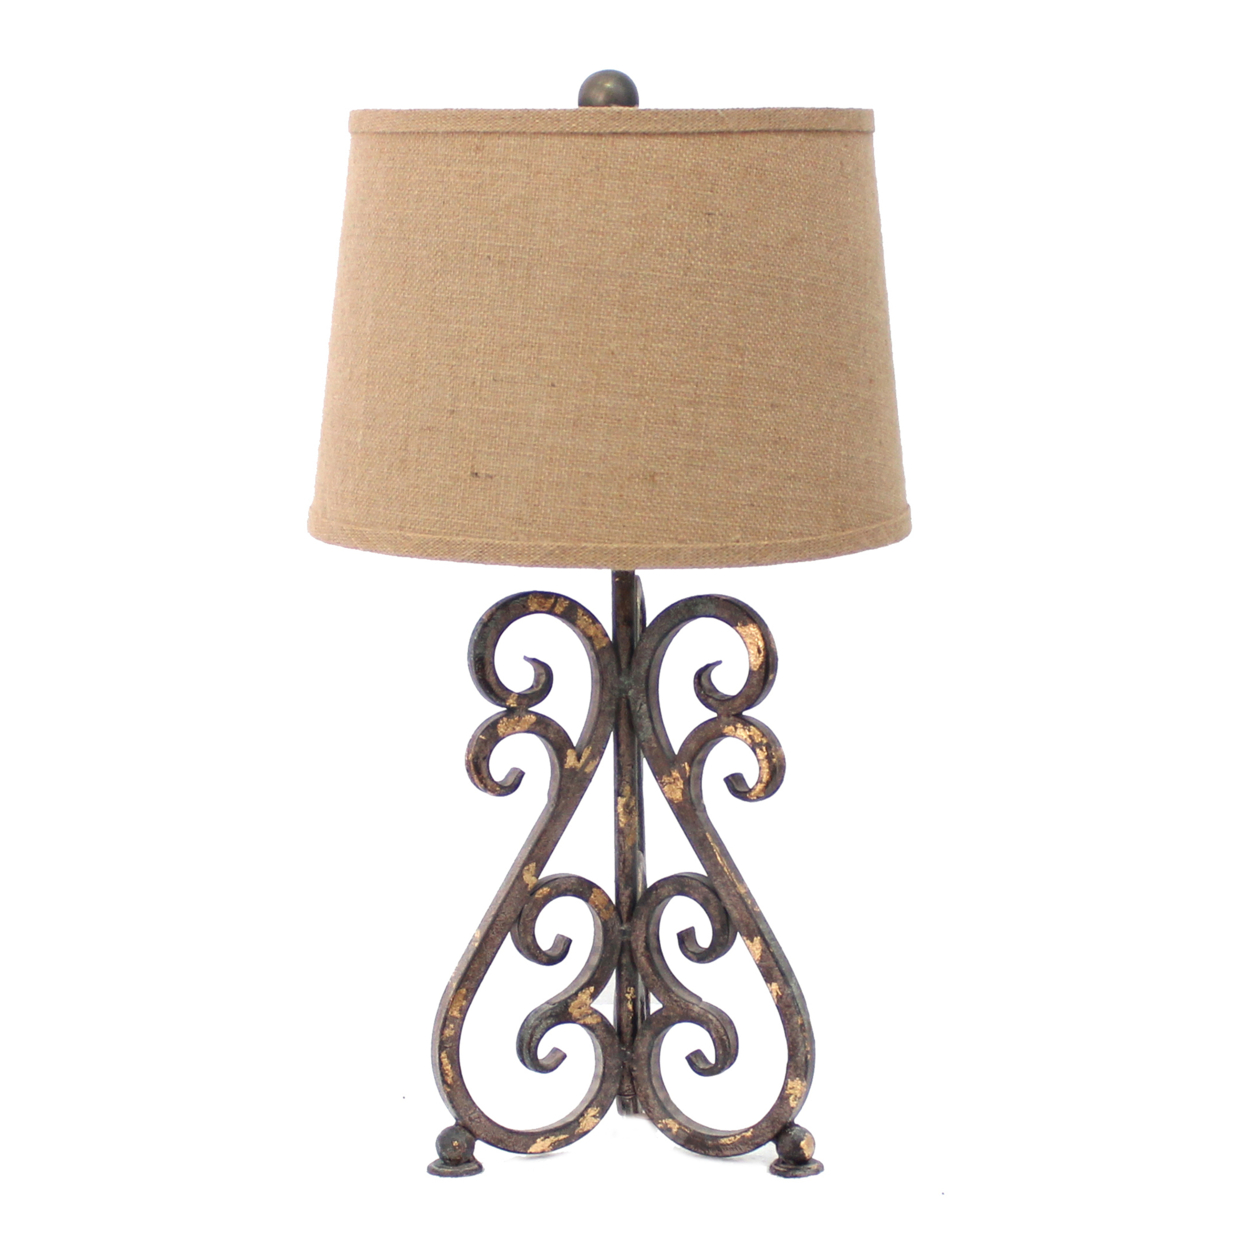 Metal Table Lamp With Scroll Design Base And 2 Way Switch,Bronze And Beige- Saltoro Sherpi